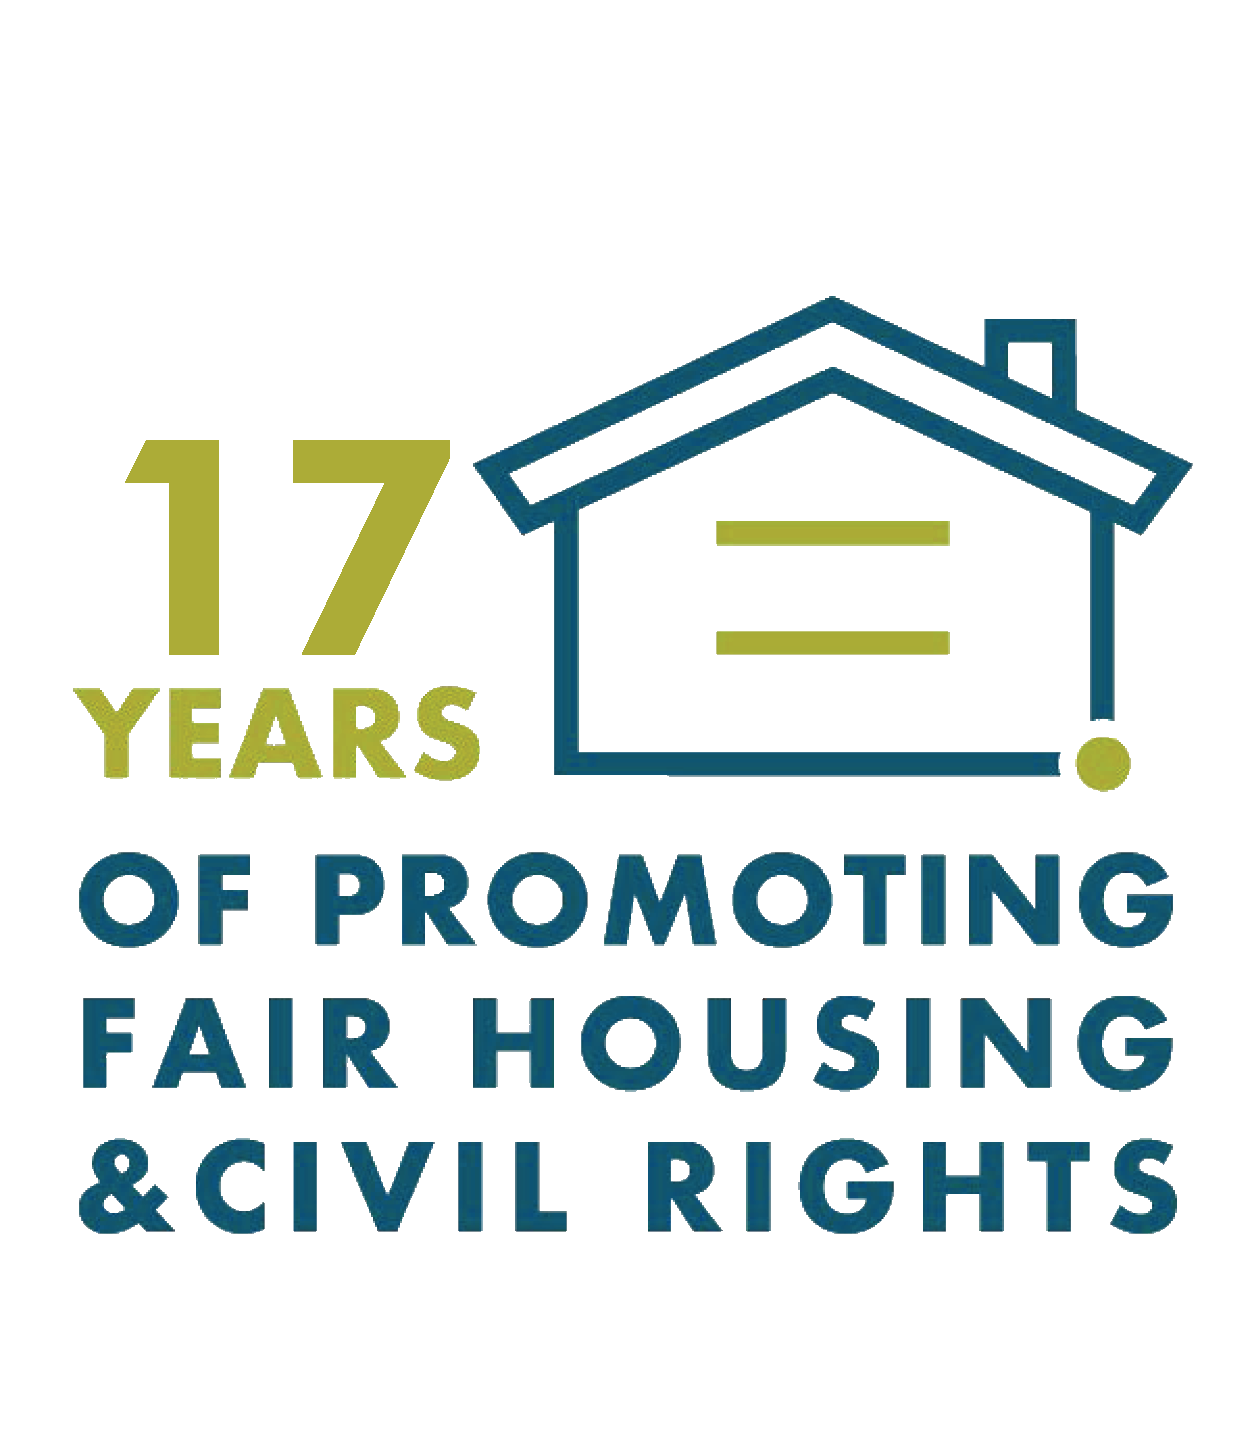 15 years promoting civi rights housing